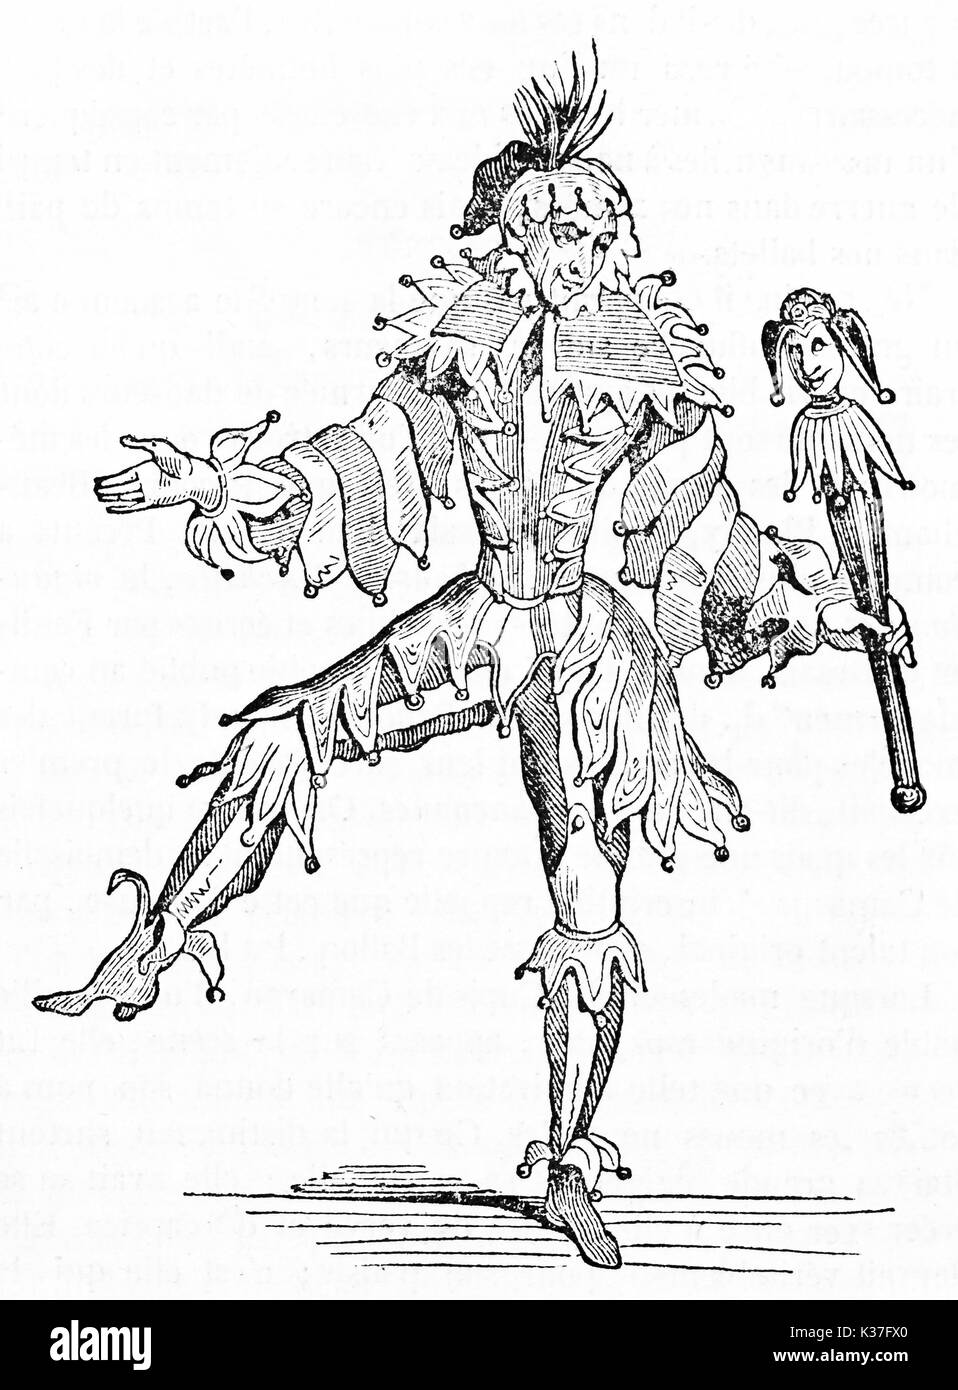 Ancient Jester posing on one leg wearing his costume and holding a scepter. Old Illustration by unidentified author published on Magasin Pittoresque Paris 1834 Stock Photo